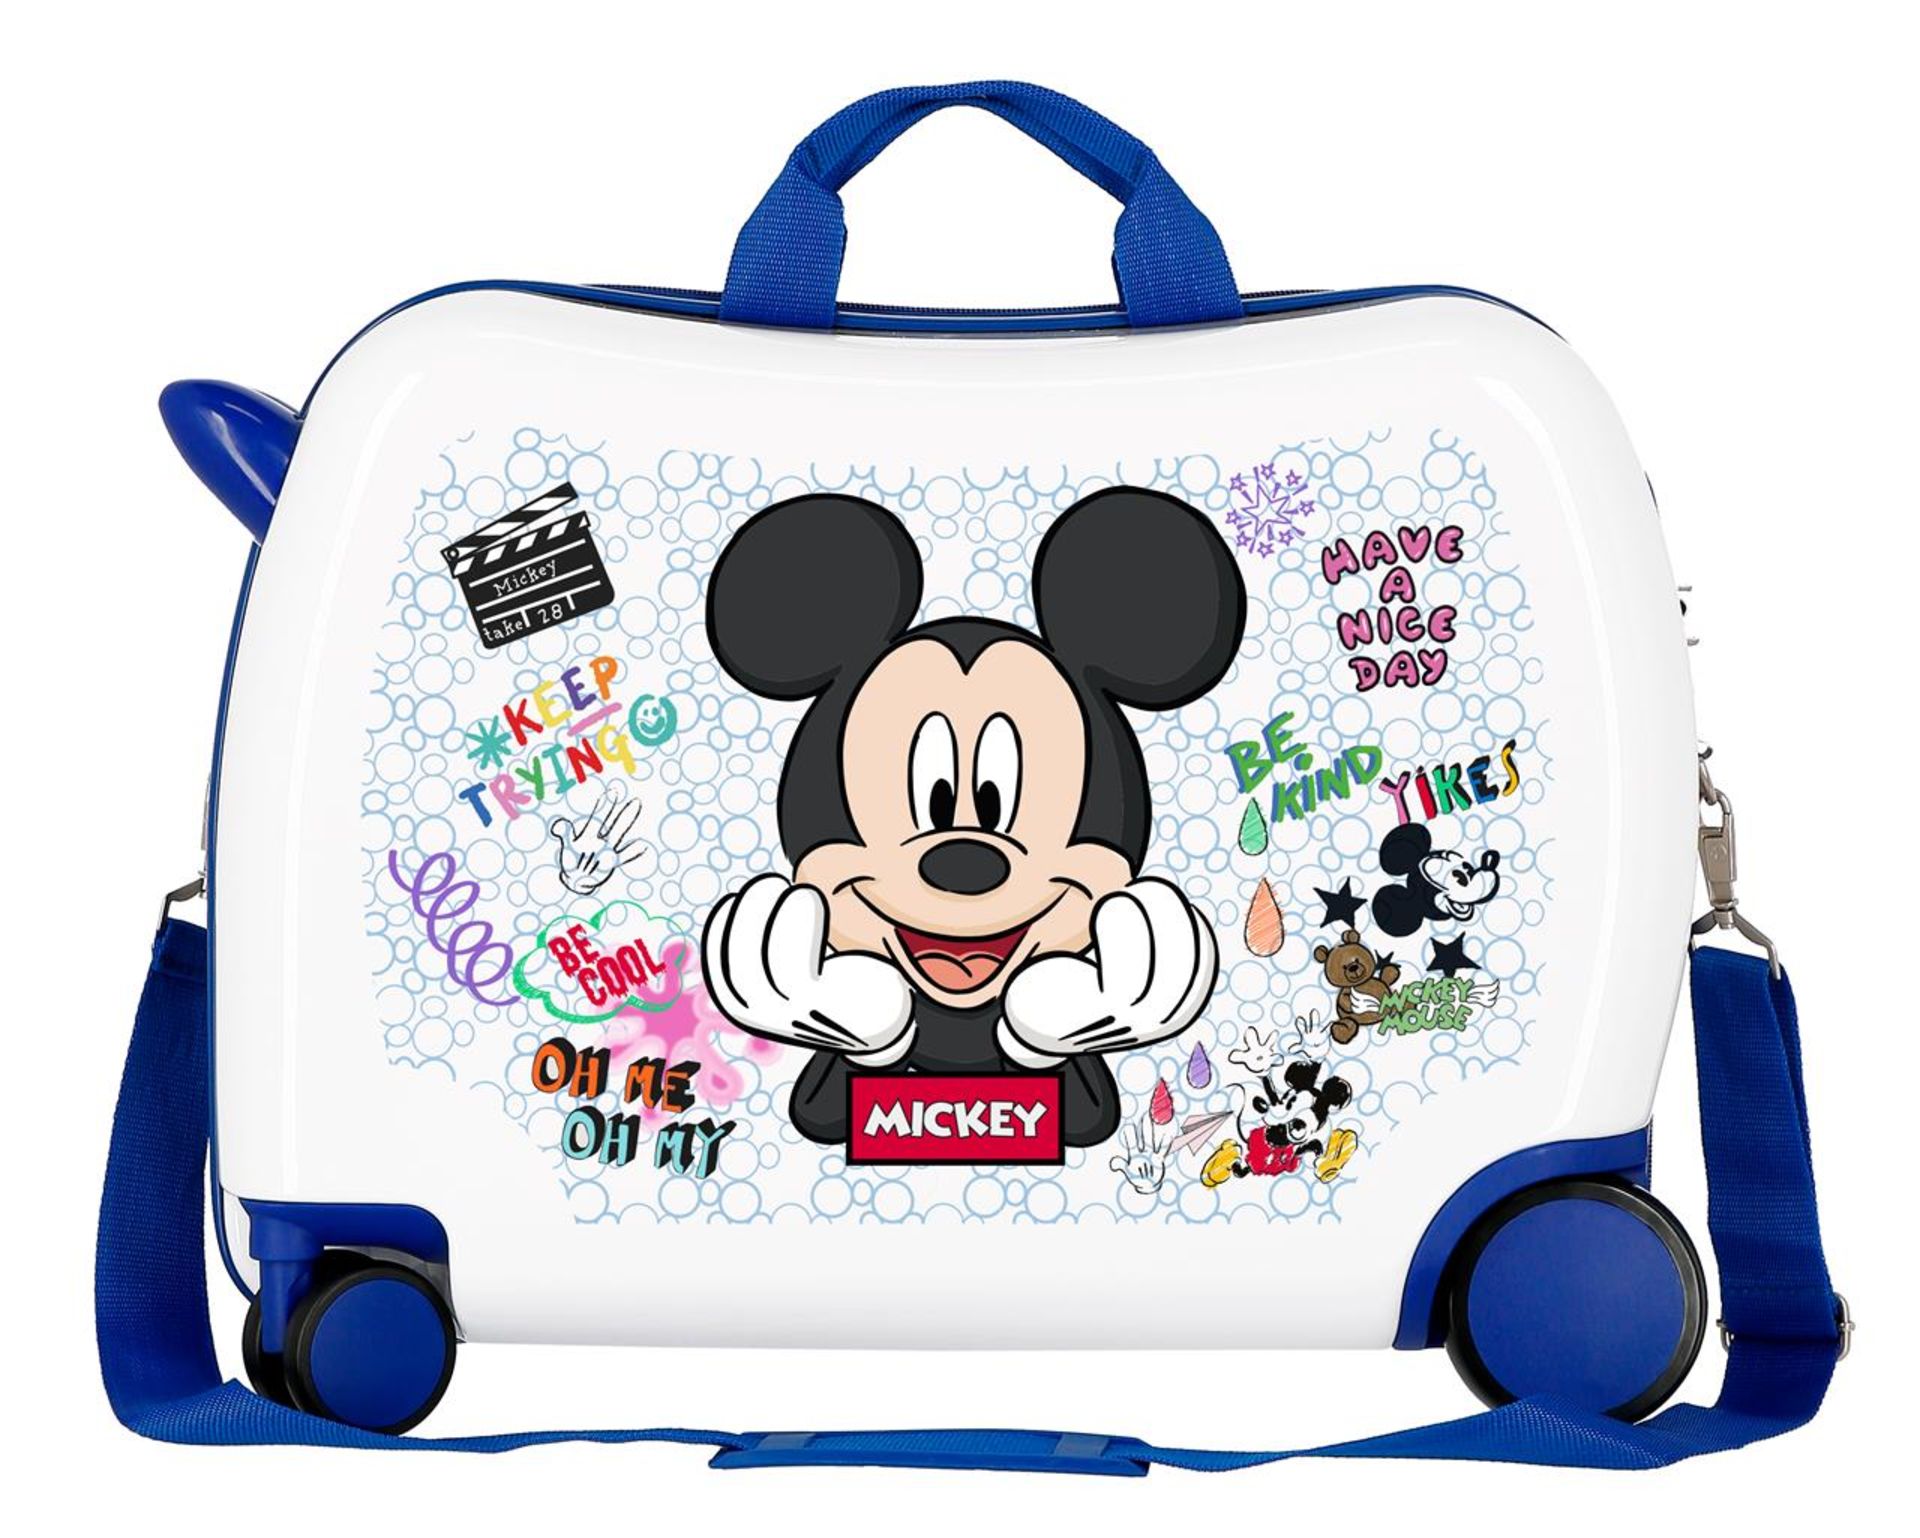 Pallet Of 48 Joumma Bags Rolling Suitcases In Various Disney Designs And Colours 50X38X20 Cm - Image 56 of 102